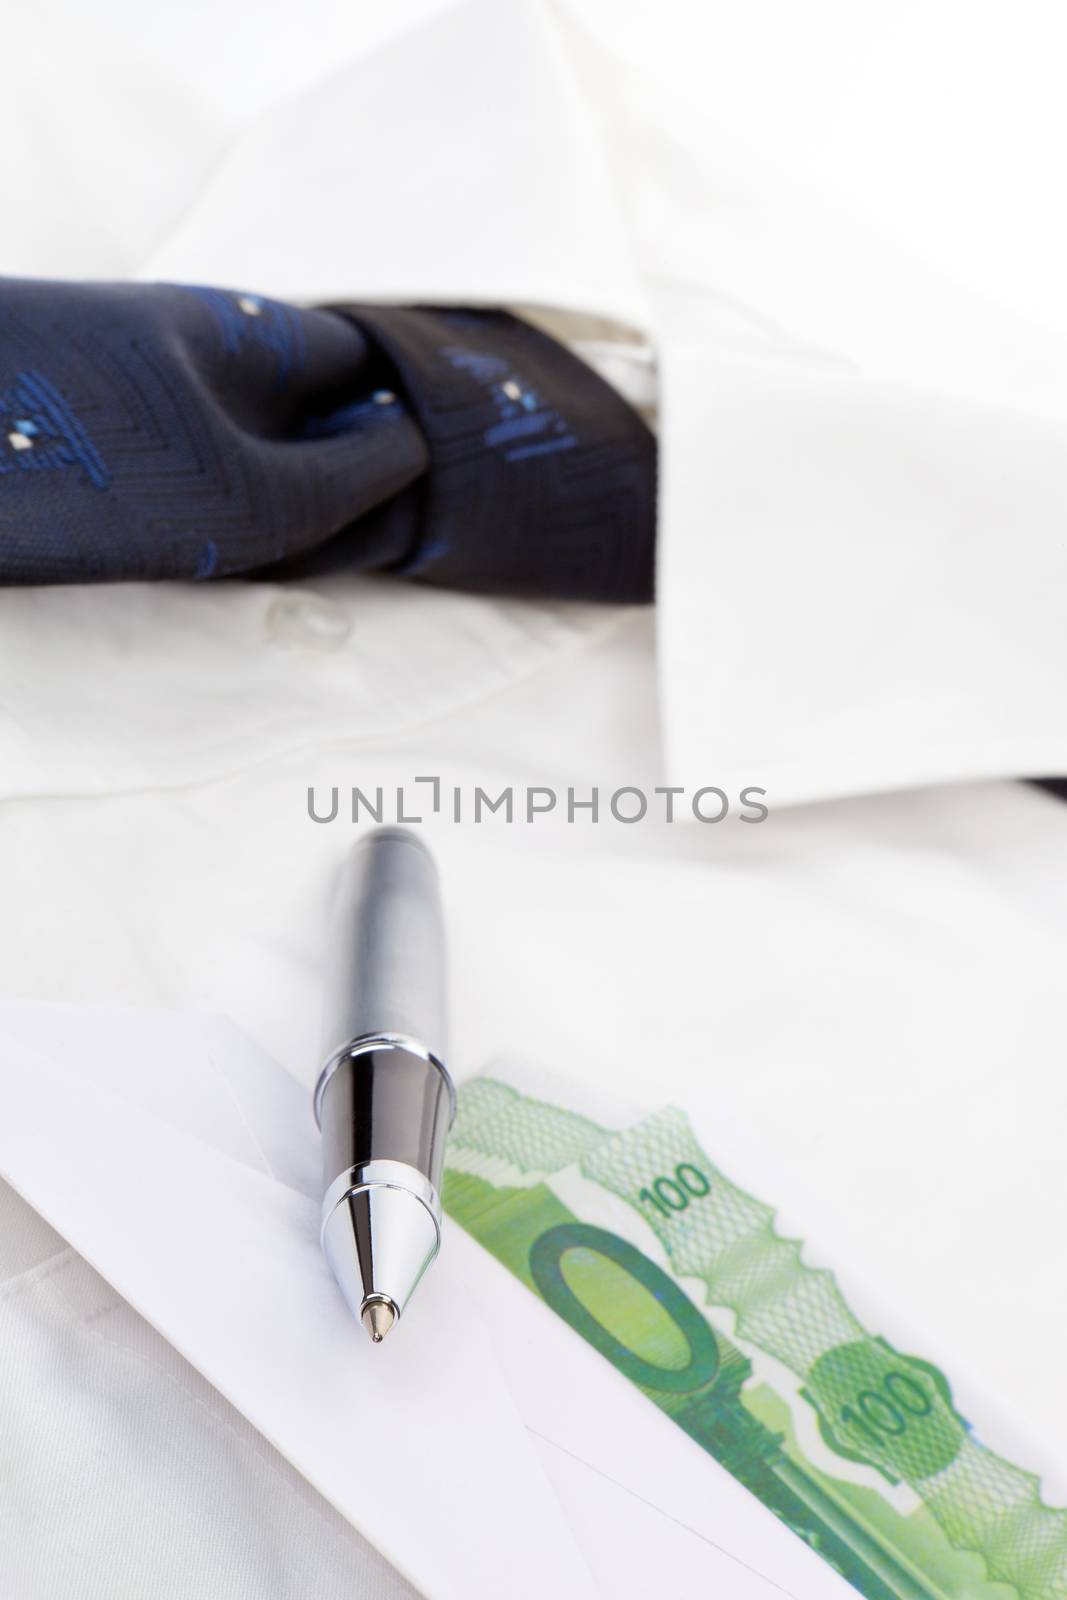 Dress shirt with blue neck tie hundred eur banknotes with envelope and pen in pocket.